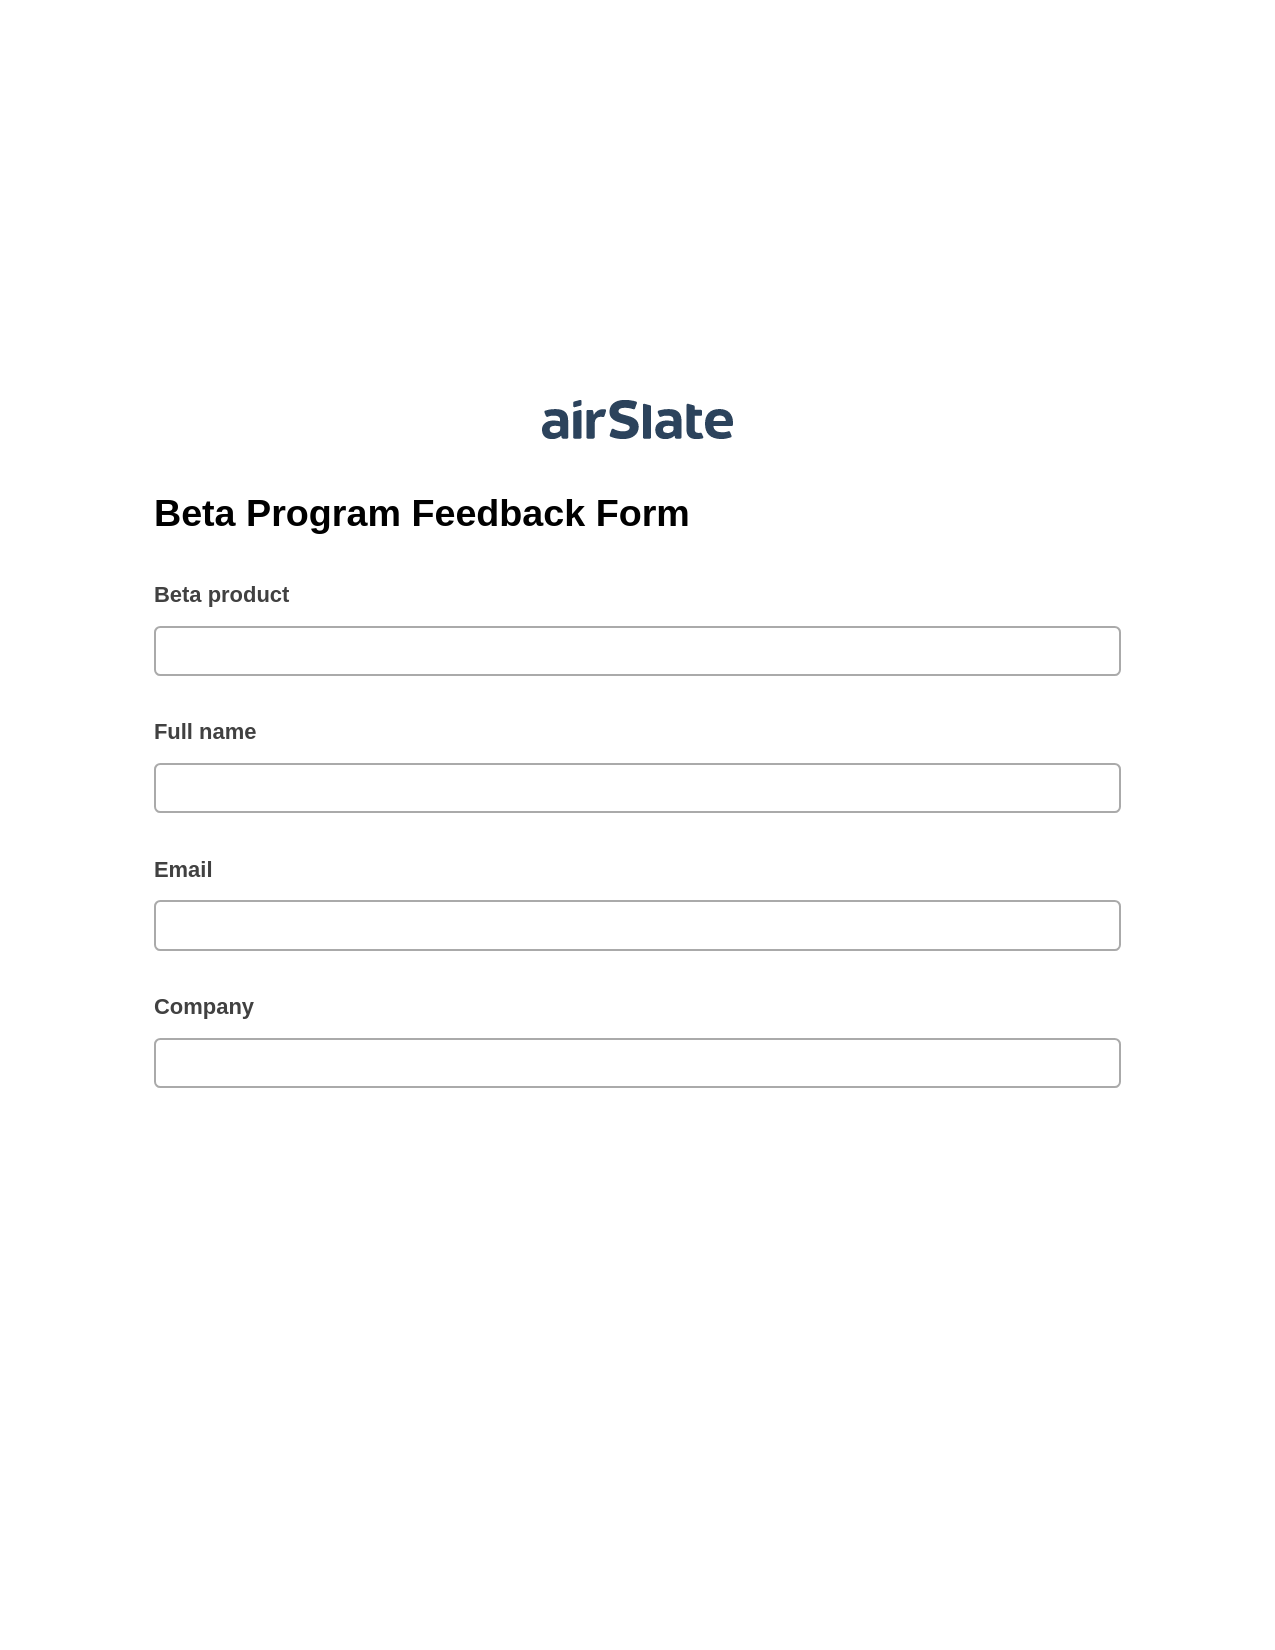 Beta Program Feedback Form Pre-fill from CSV File Bot, Send a Slate to MS Dynamics 365 Contact Bot, Export to Excel 365 Bot